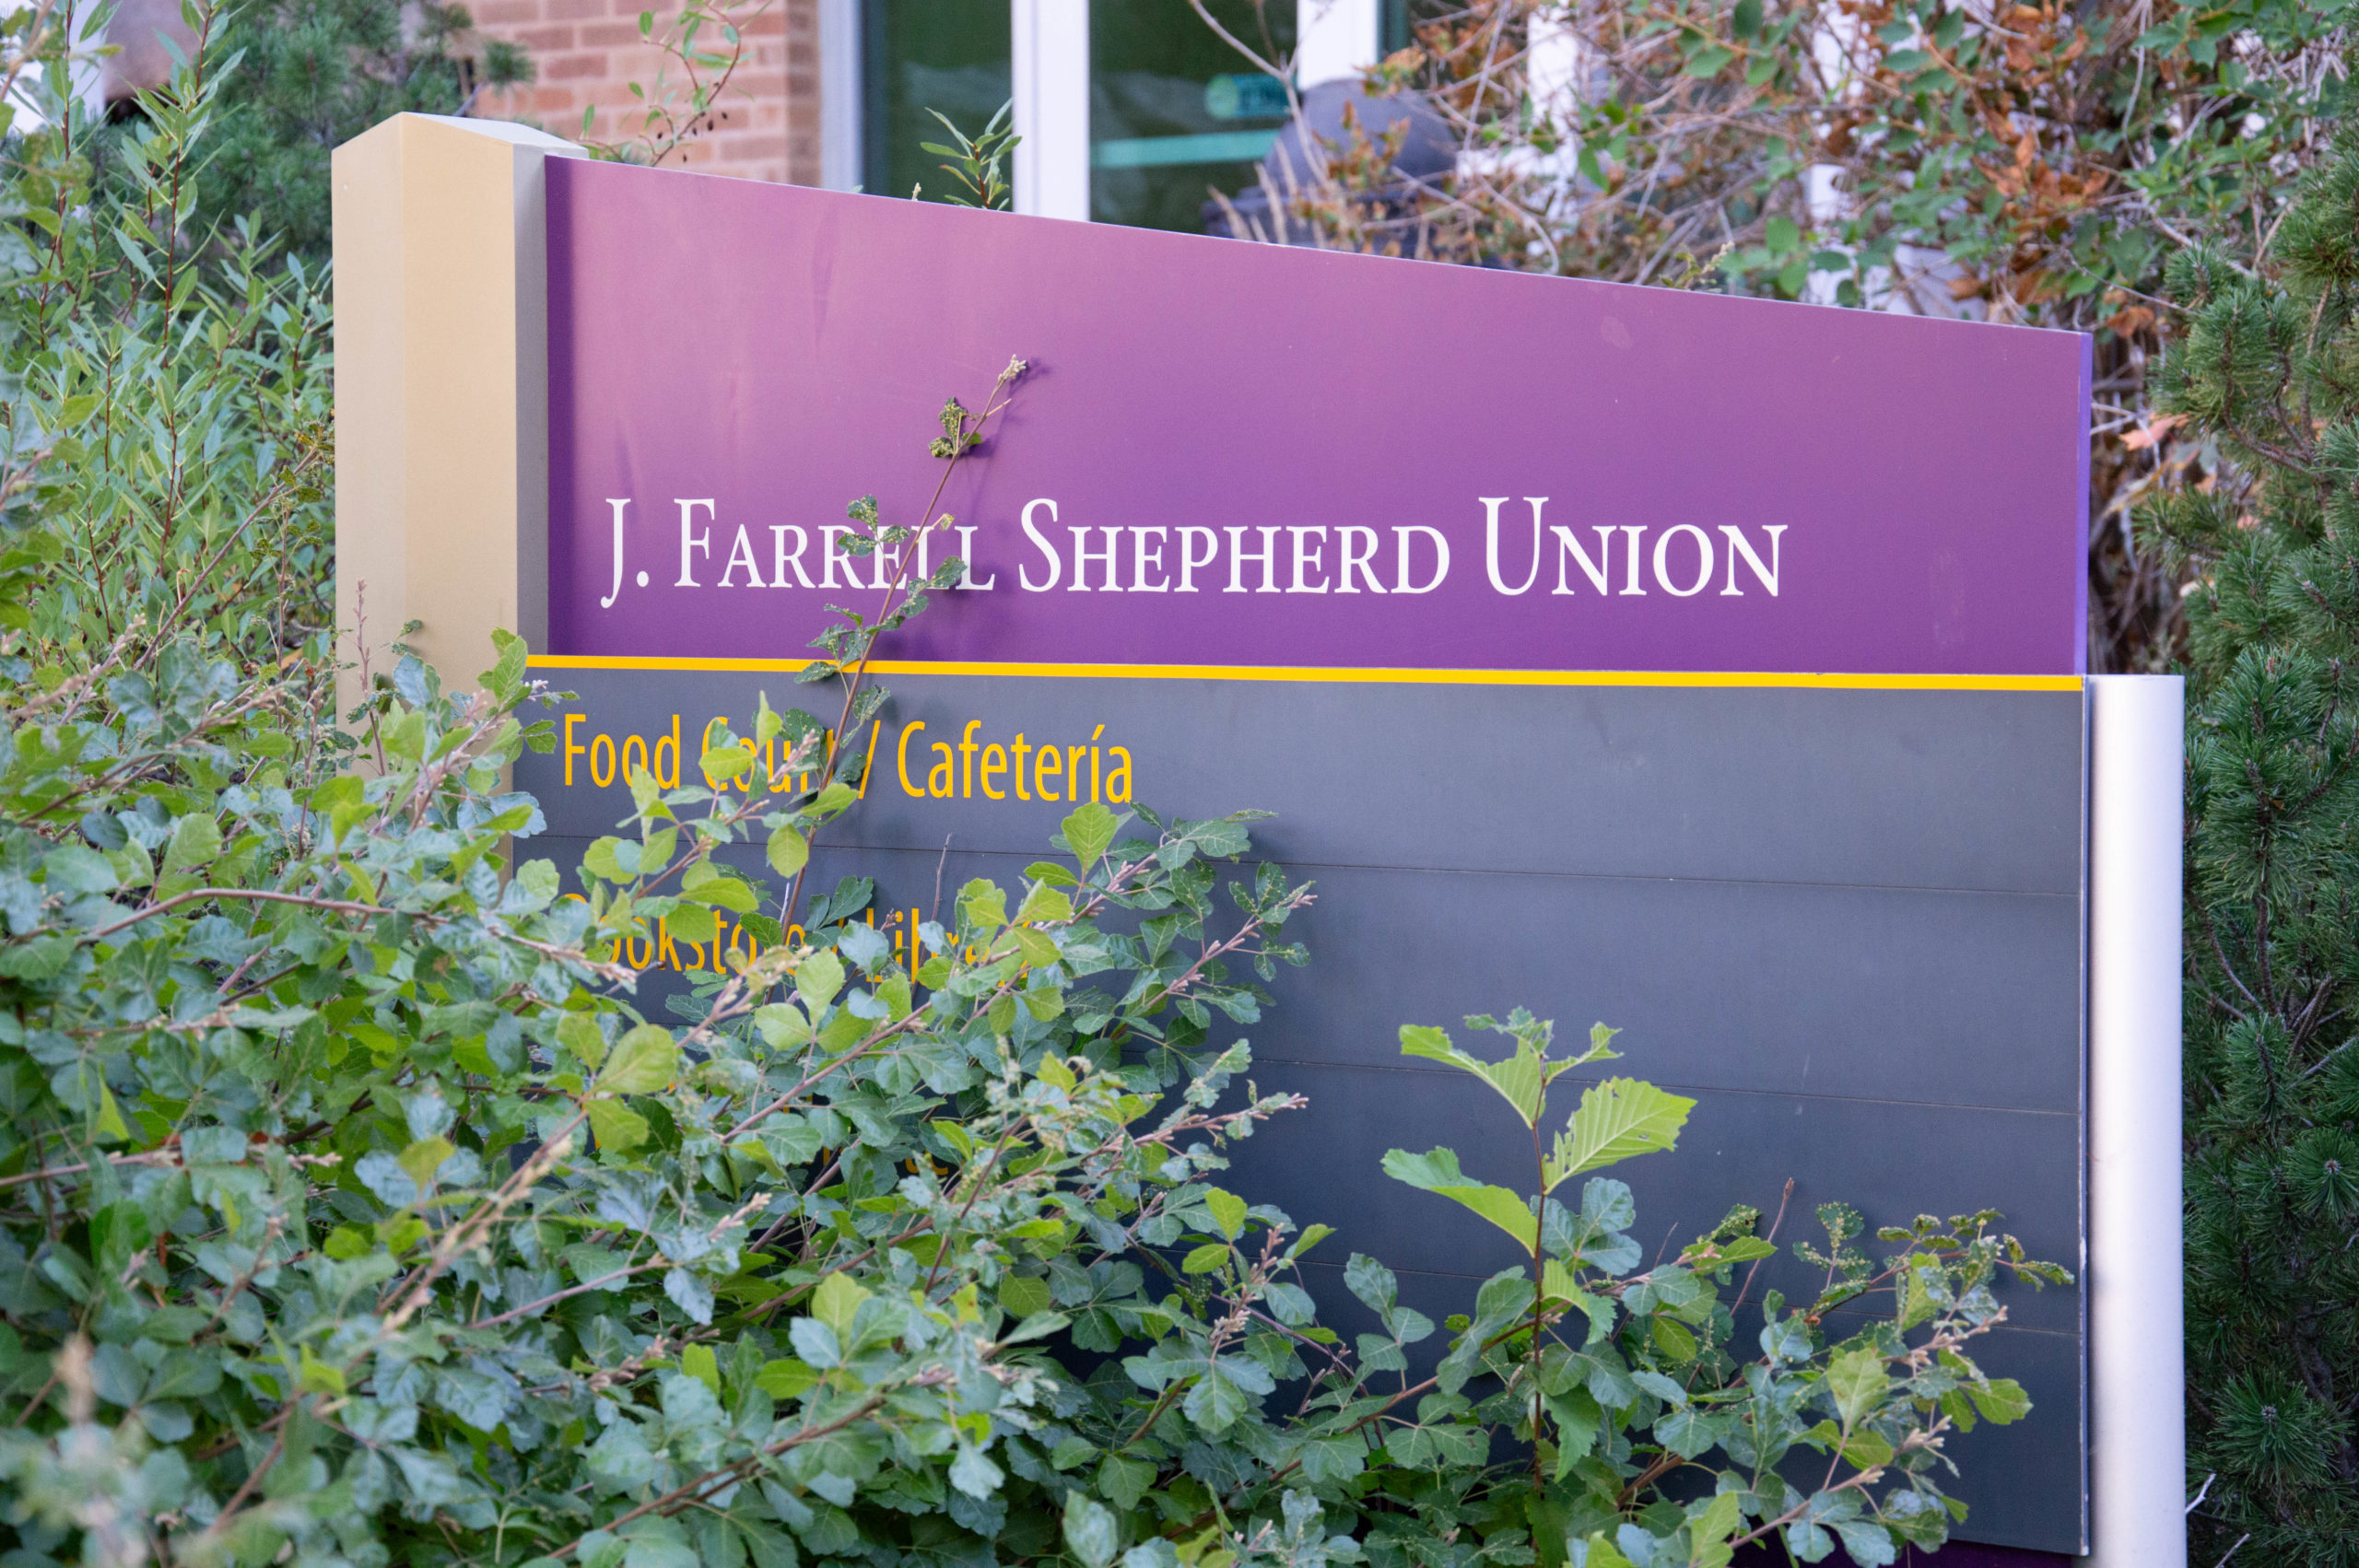 The J. Farrell Shepherd Union sign outside of the building.